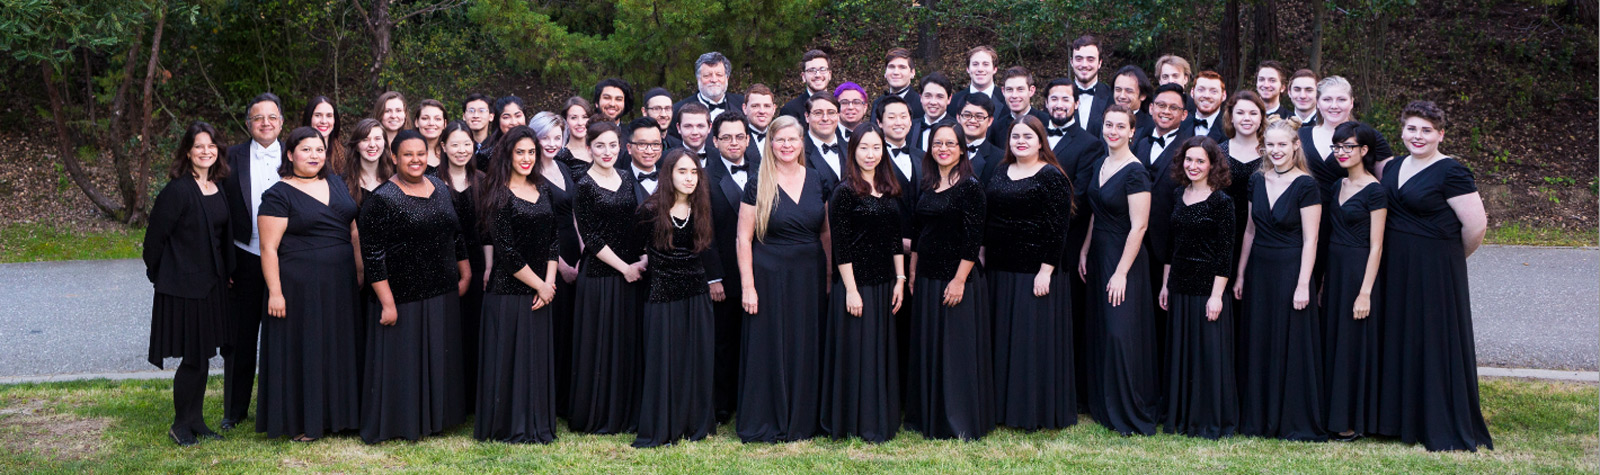 Formal Choral Group